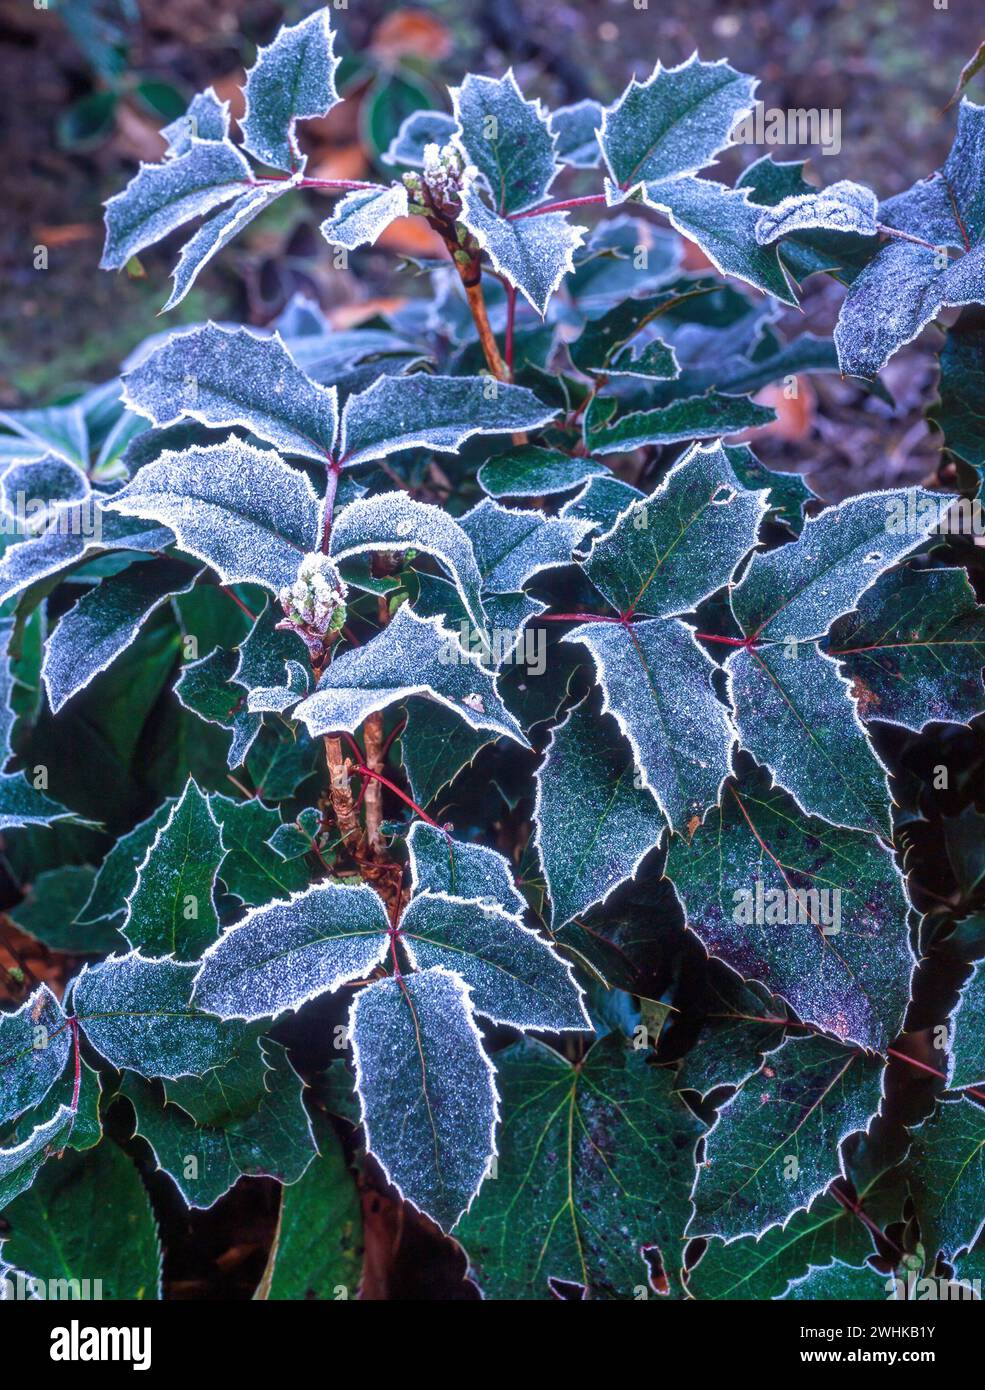 Mahonia wagnerii / aquifolium 'Apollo' leaves with hoar frost in Winter, England, UK Stock Photo